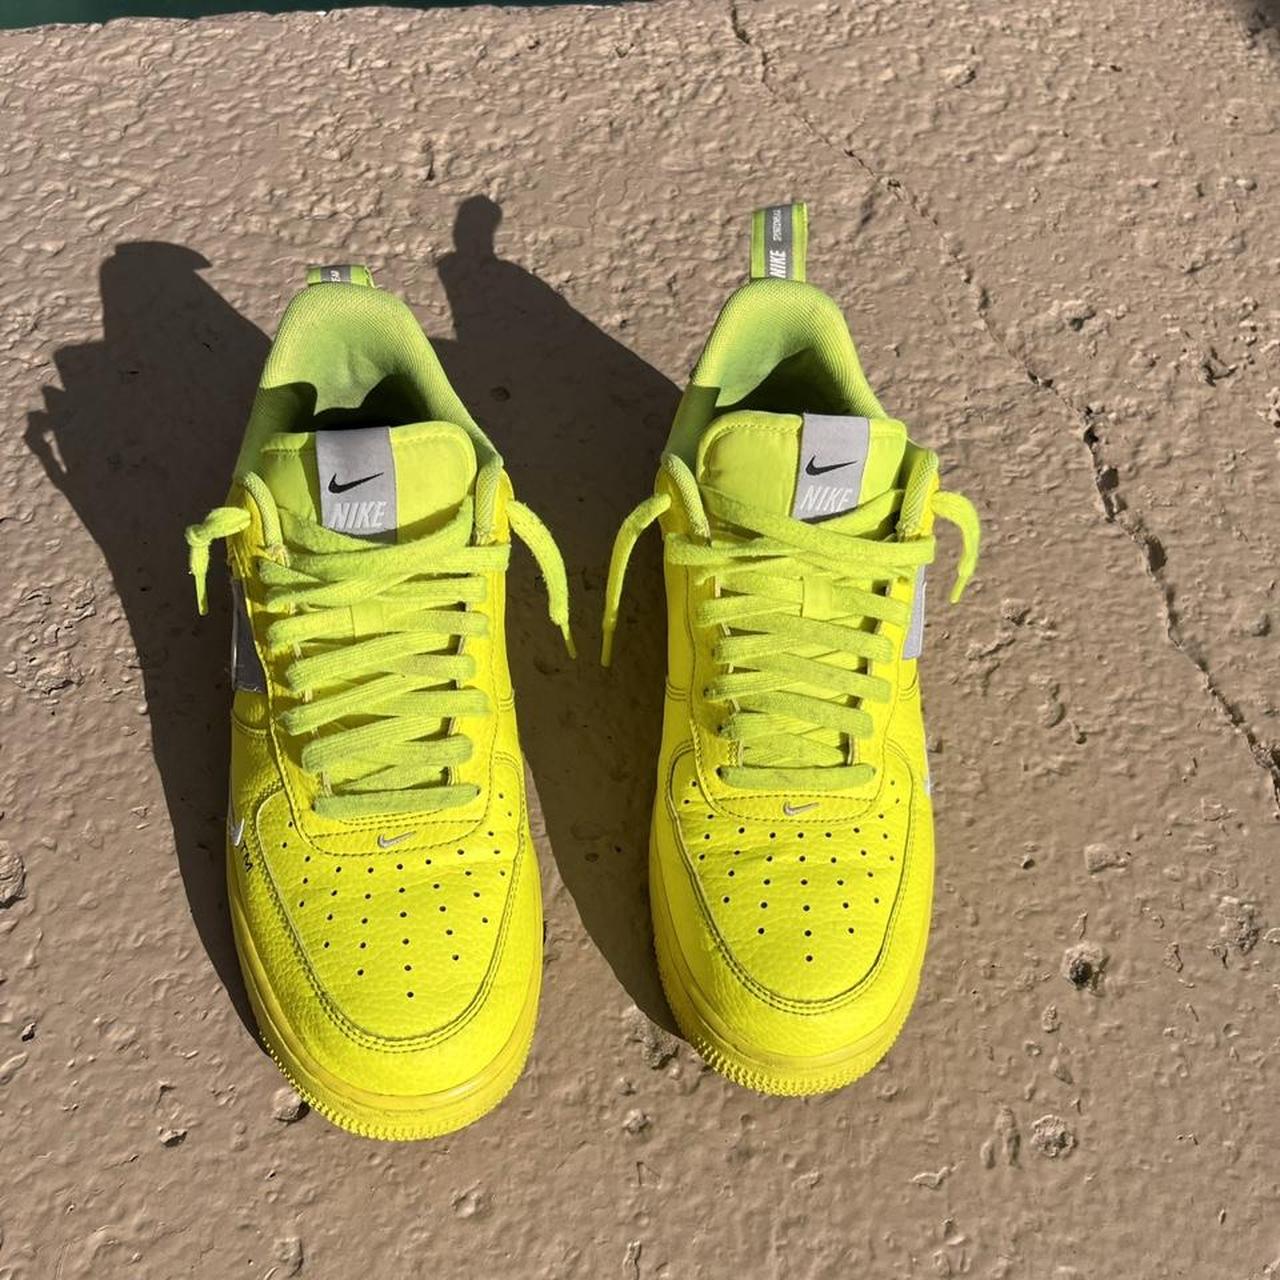 Nike Air Force 1 Utility Volt Neon Yellow Sneakers Toddler Shoes